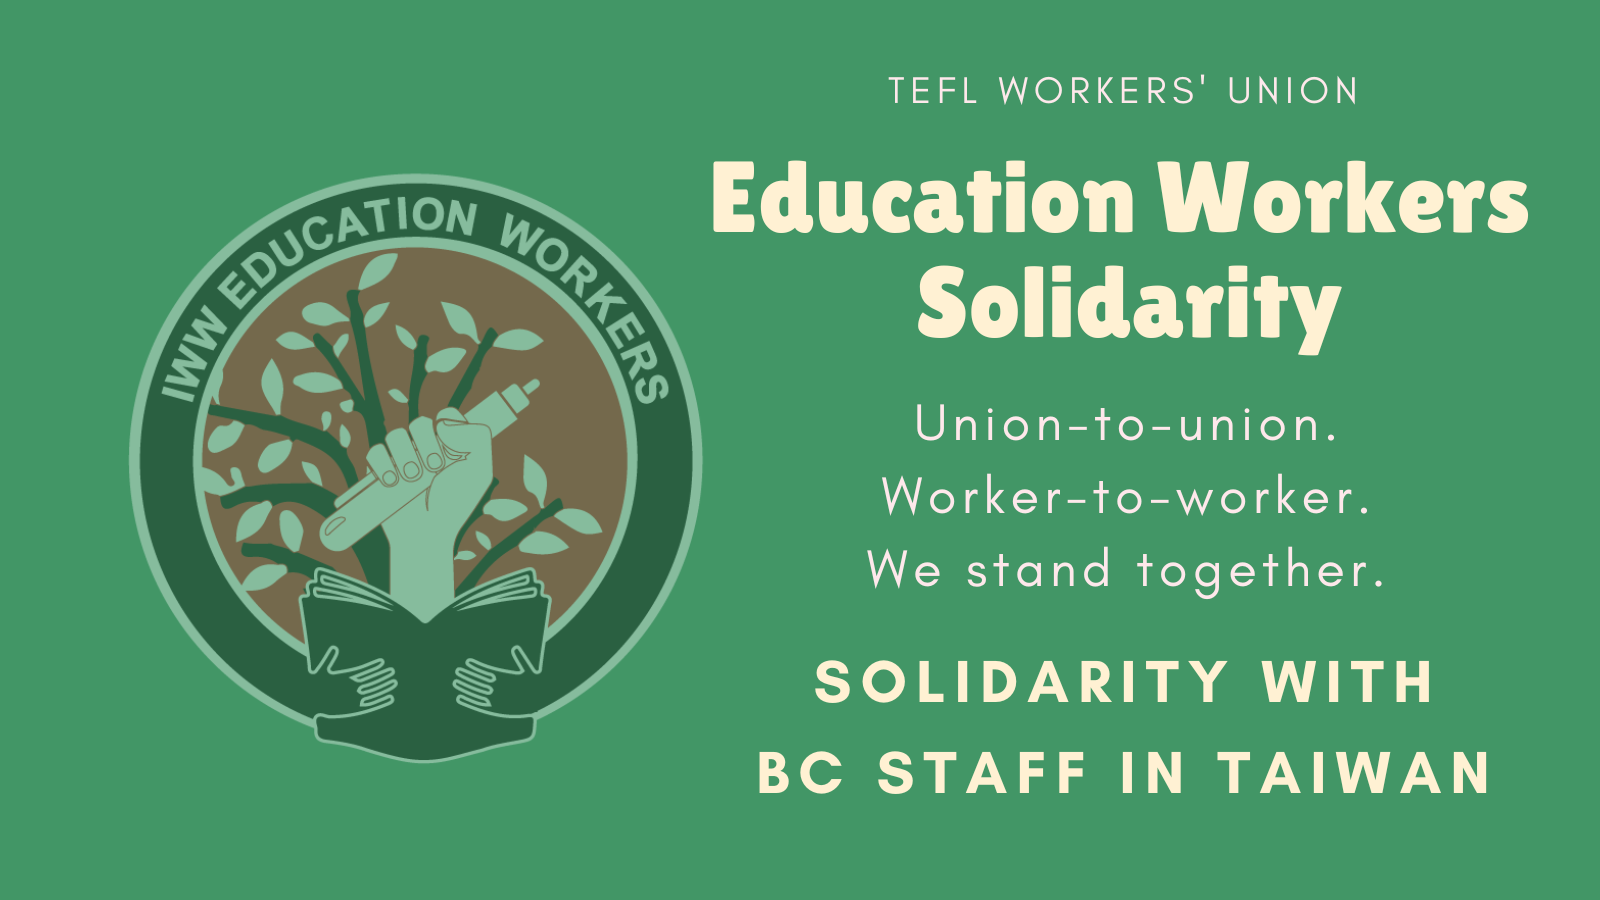 Image reads: Education Workers Solidarity! Solidarity with BC staff in Taiwan!